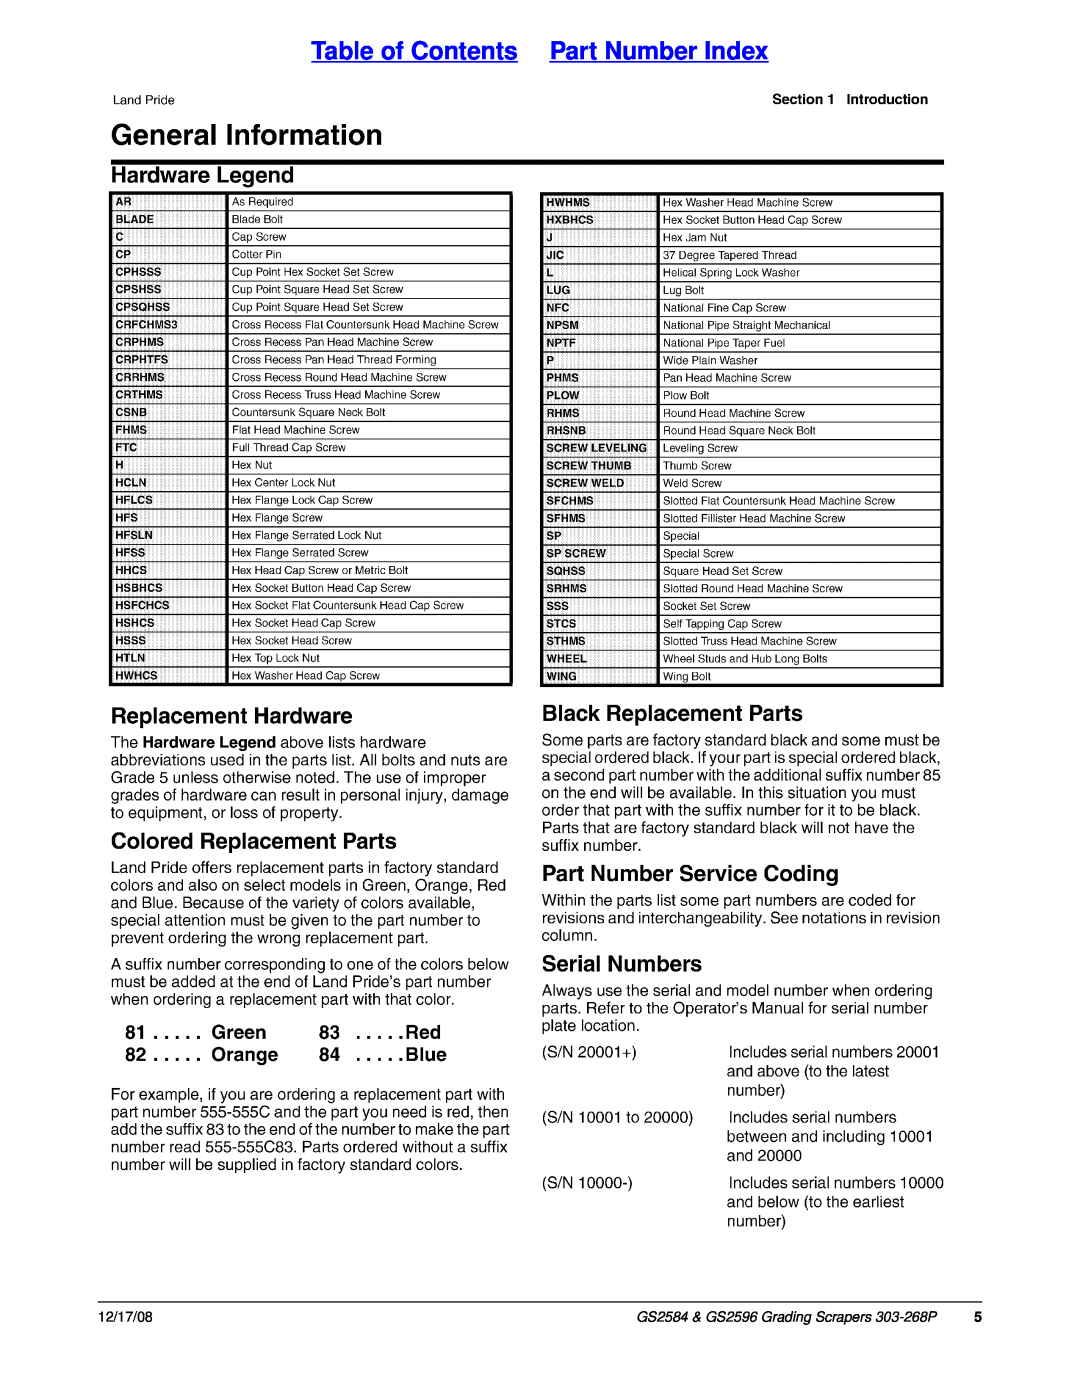 Land Pride manual Table of Contents Part Number Index, GS2584 & GS2596 Grading Scrapers 303-268P, 12/17/08 